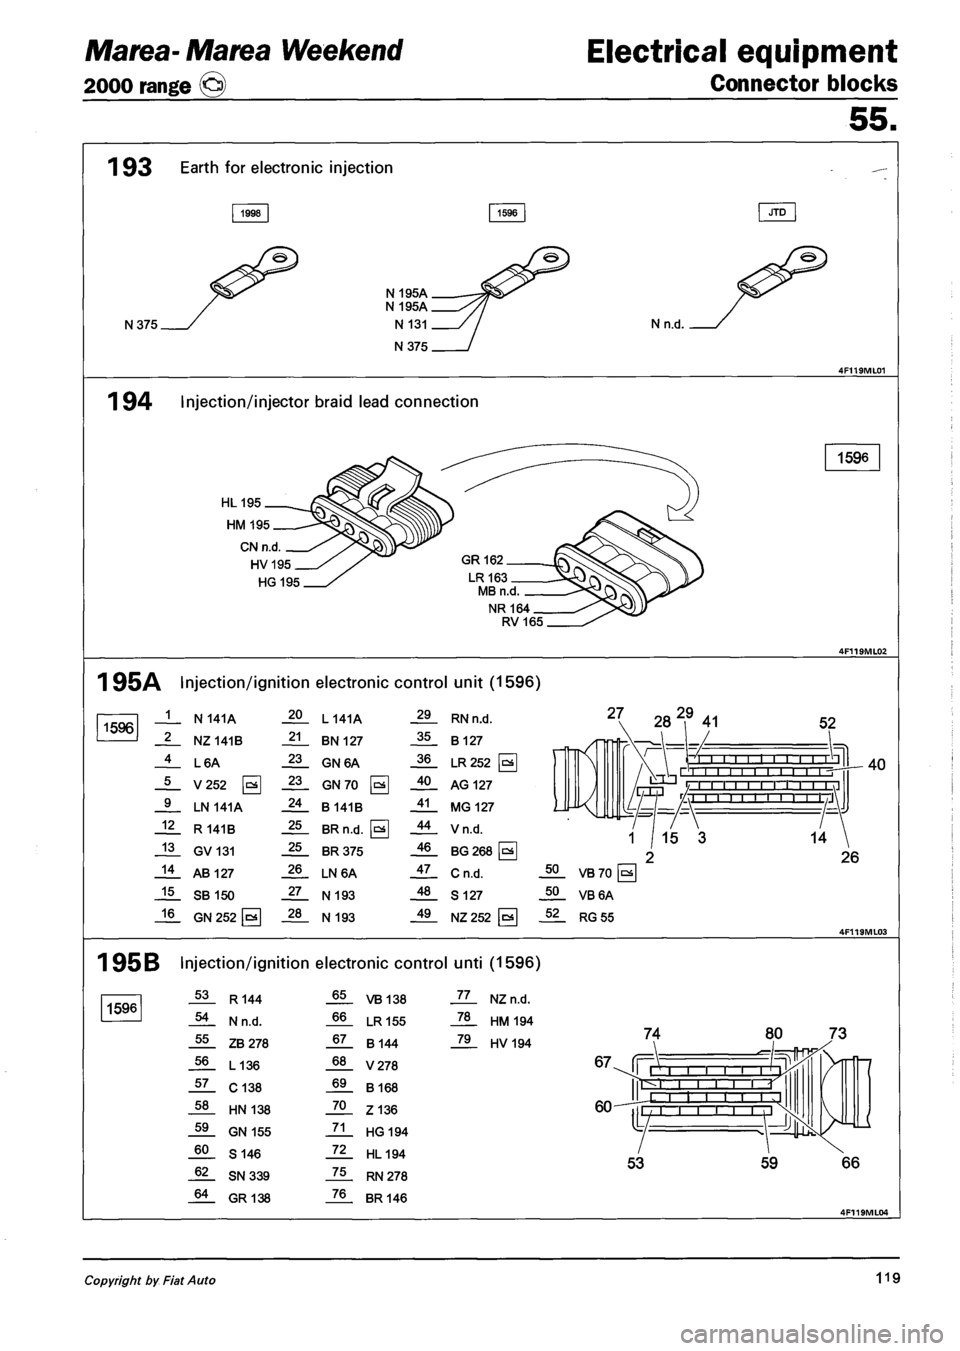 FIAT MAREA 2001 1.G Owners Guide Marea- Marea Weekend 
2000 range ® 
Electrical equipment 
Connector blocks 
55. 
1 93 Earth for electronic injection 
1998 
N375 
N 195A N 195A 
N 131 
N 375 
Nn.d. 
1 94 Injection/injector braid lea